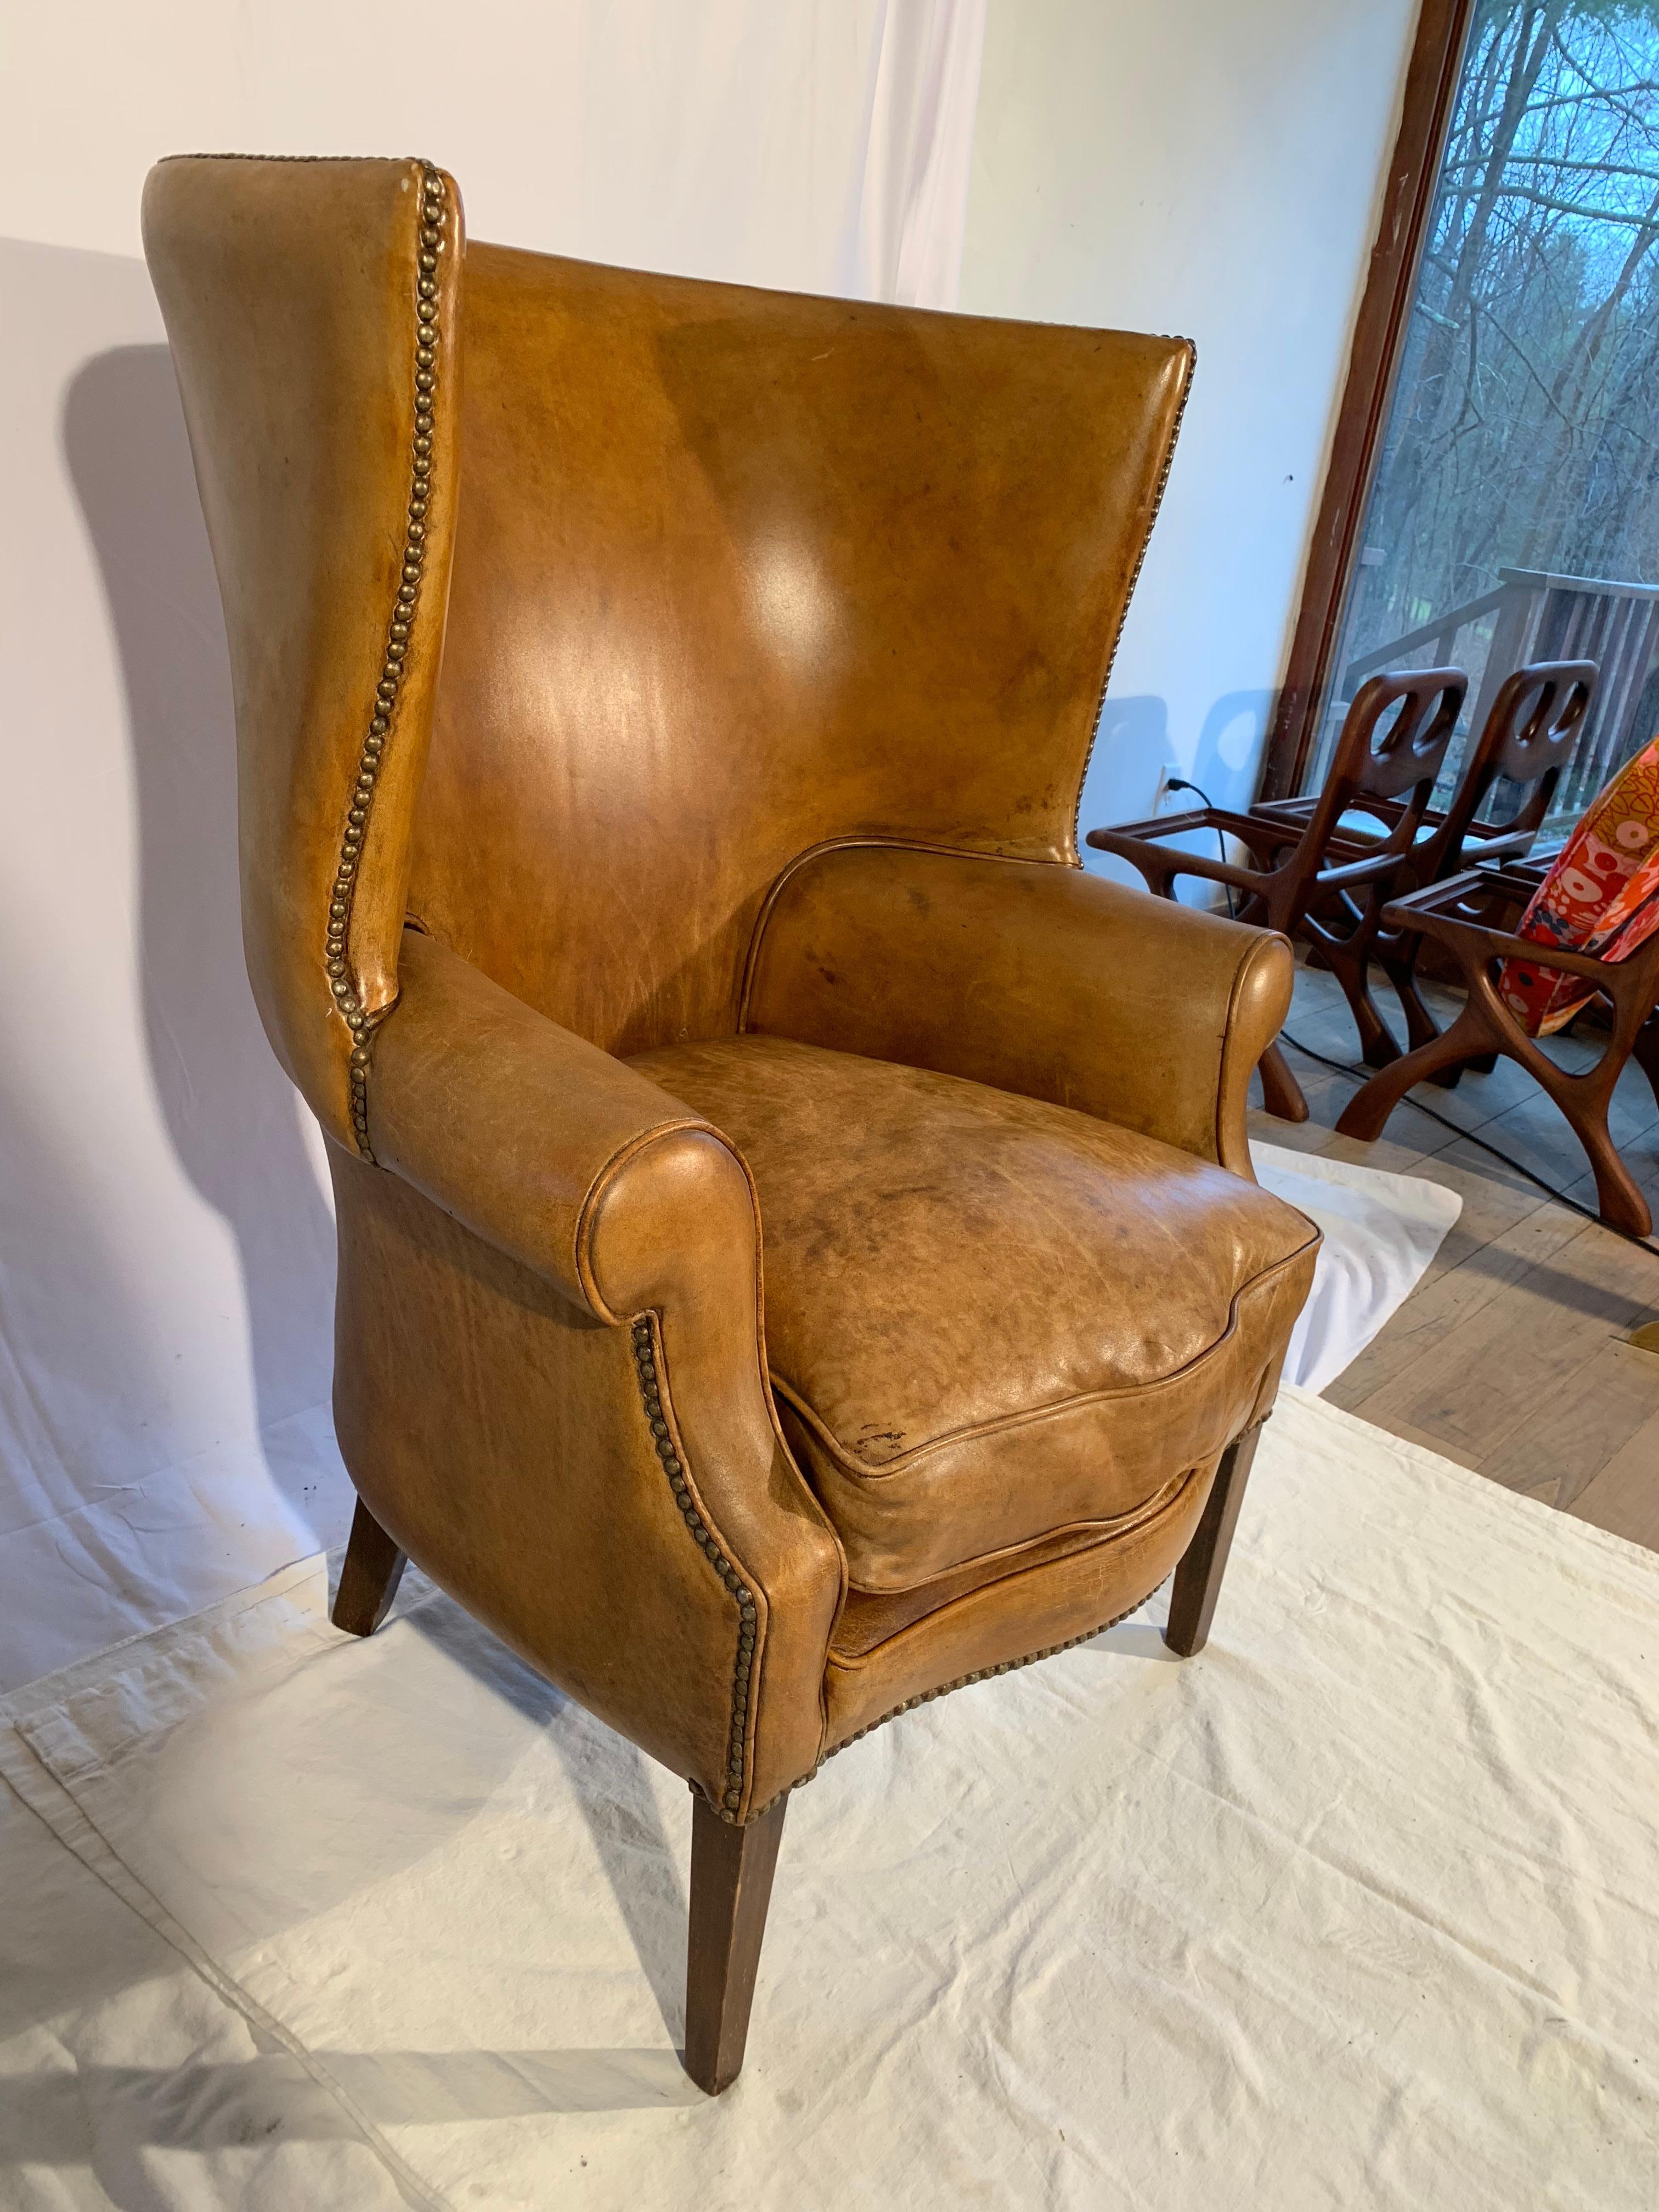 Pair of English Leather Wingback Chairs (20. Jahrhundert)